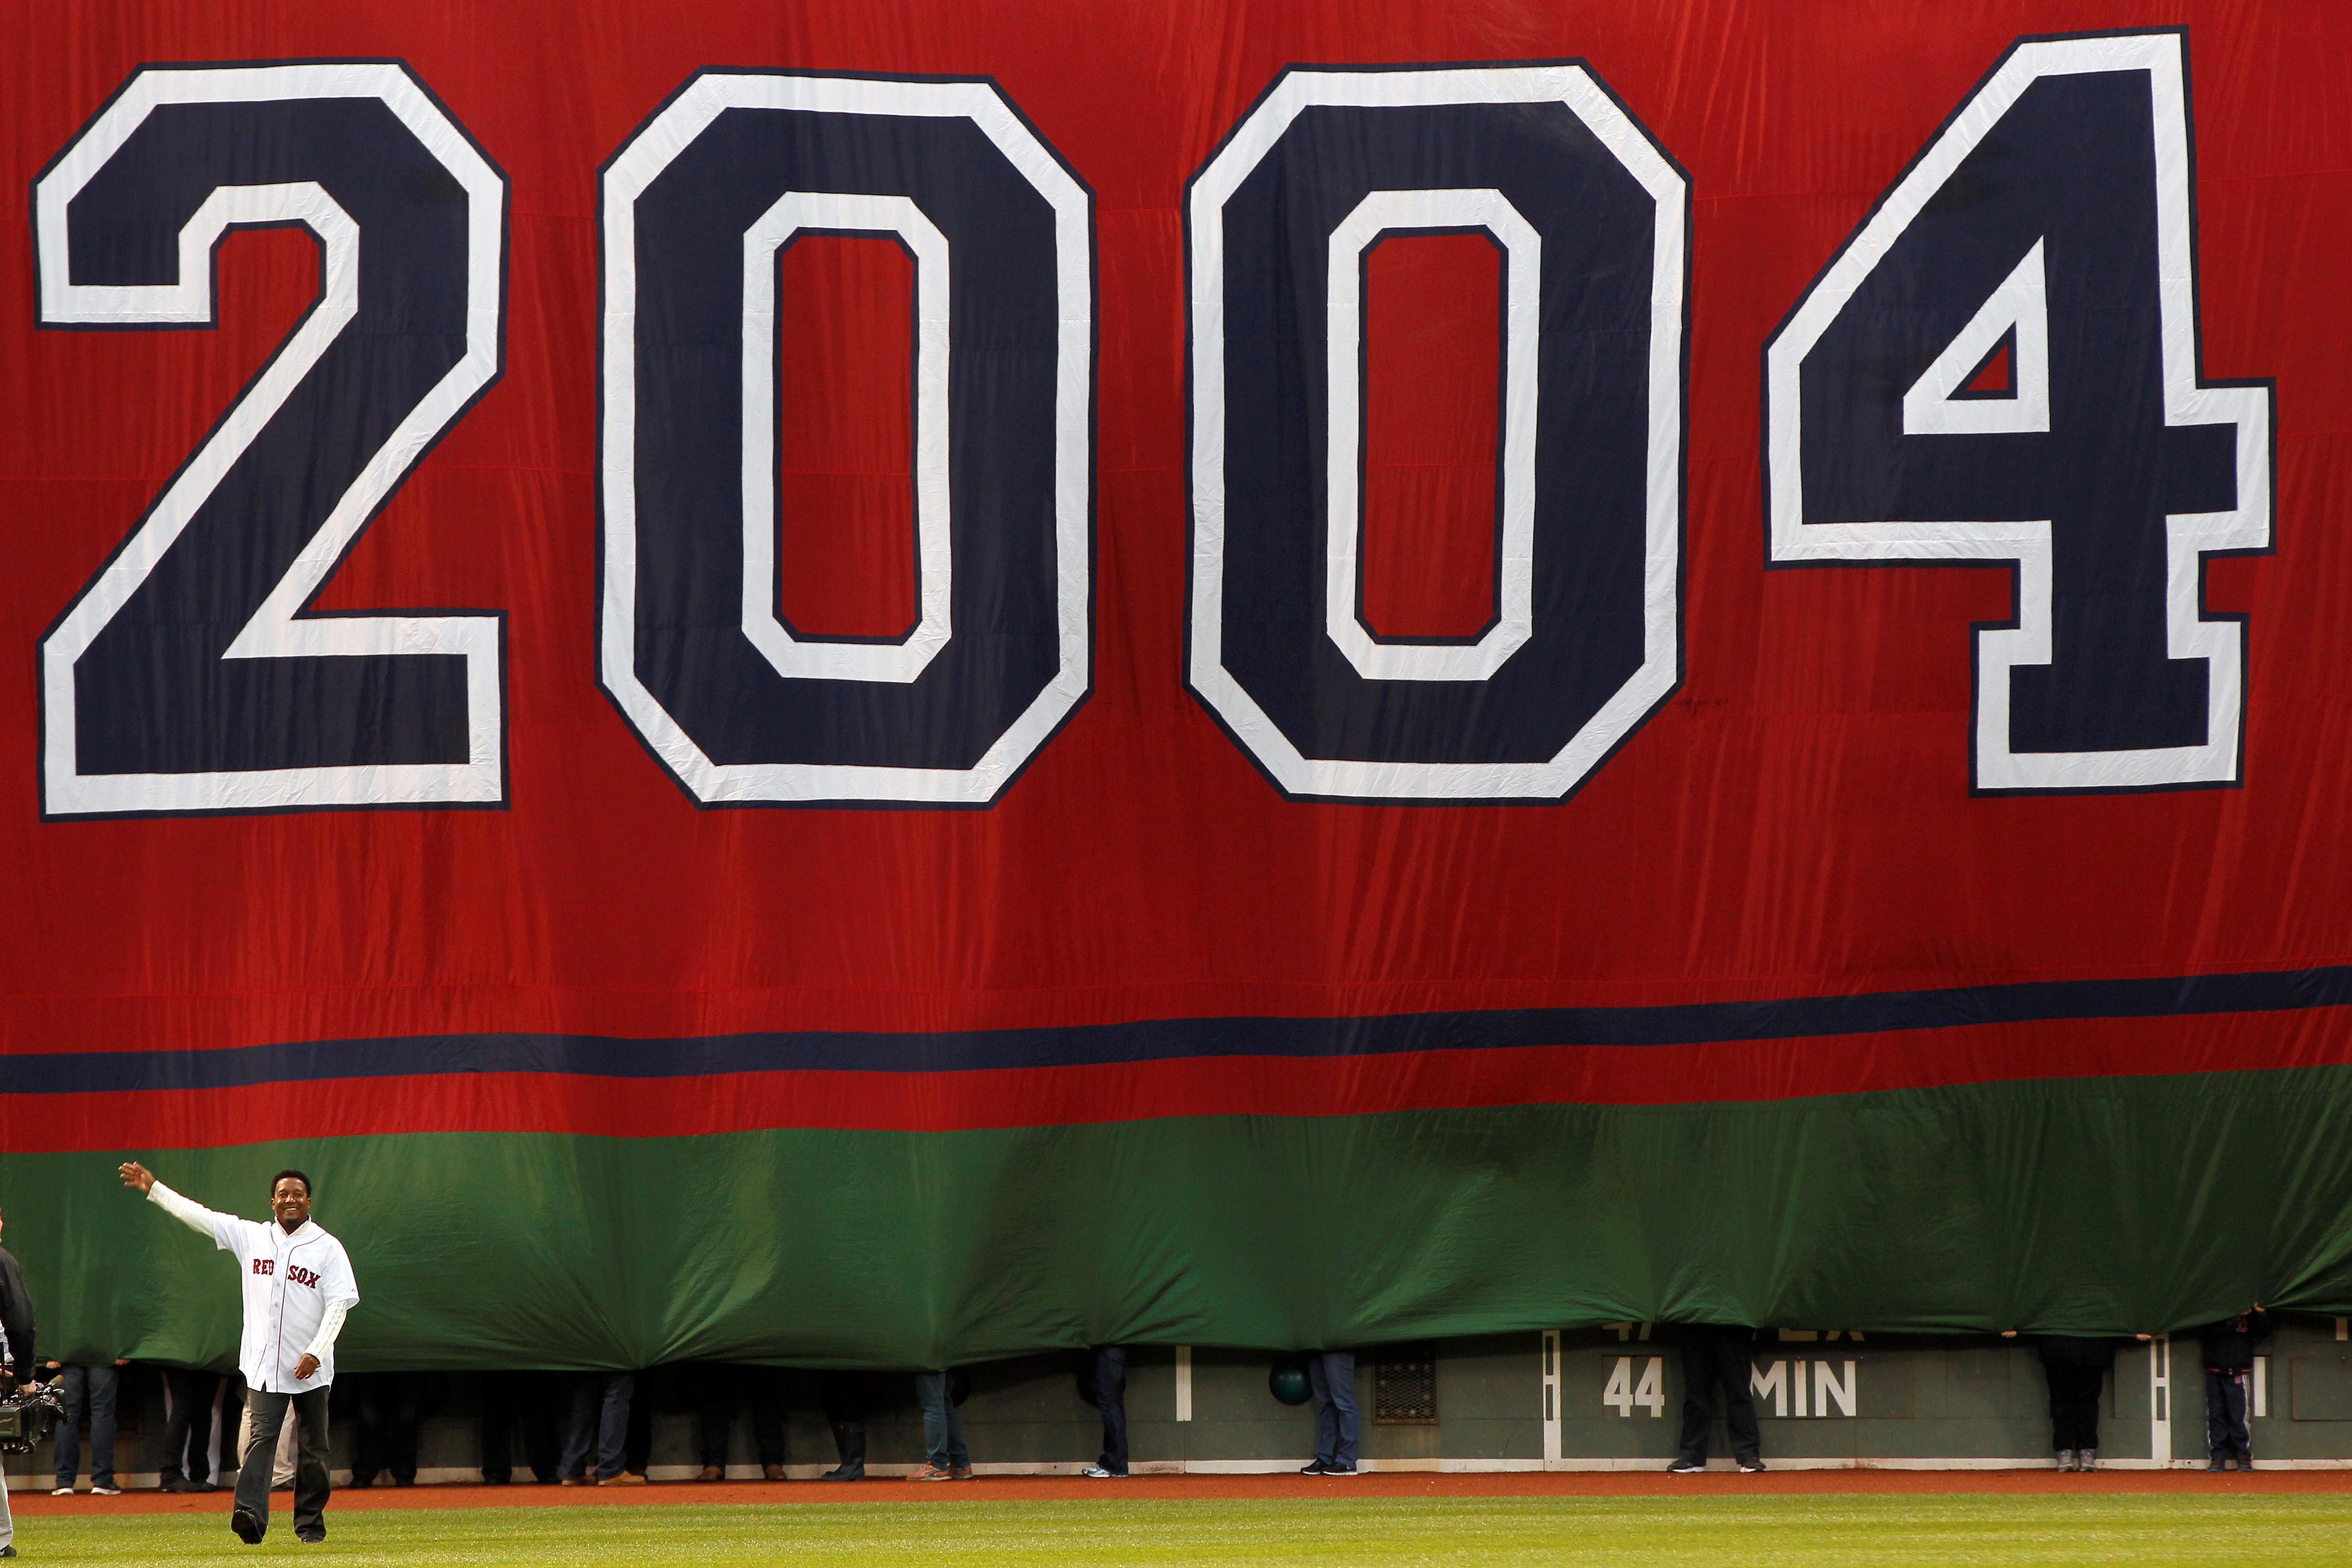 Red Sox clinch American League pennant on this day in 2004